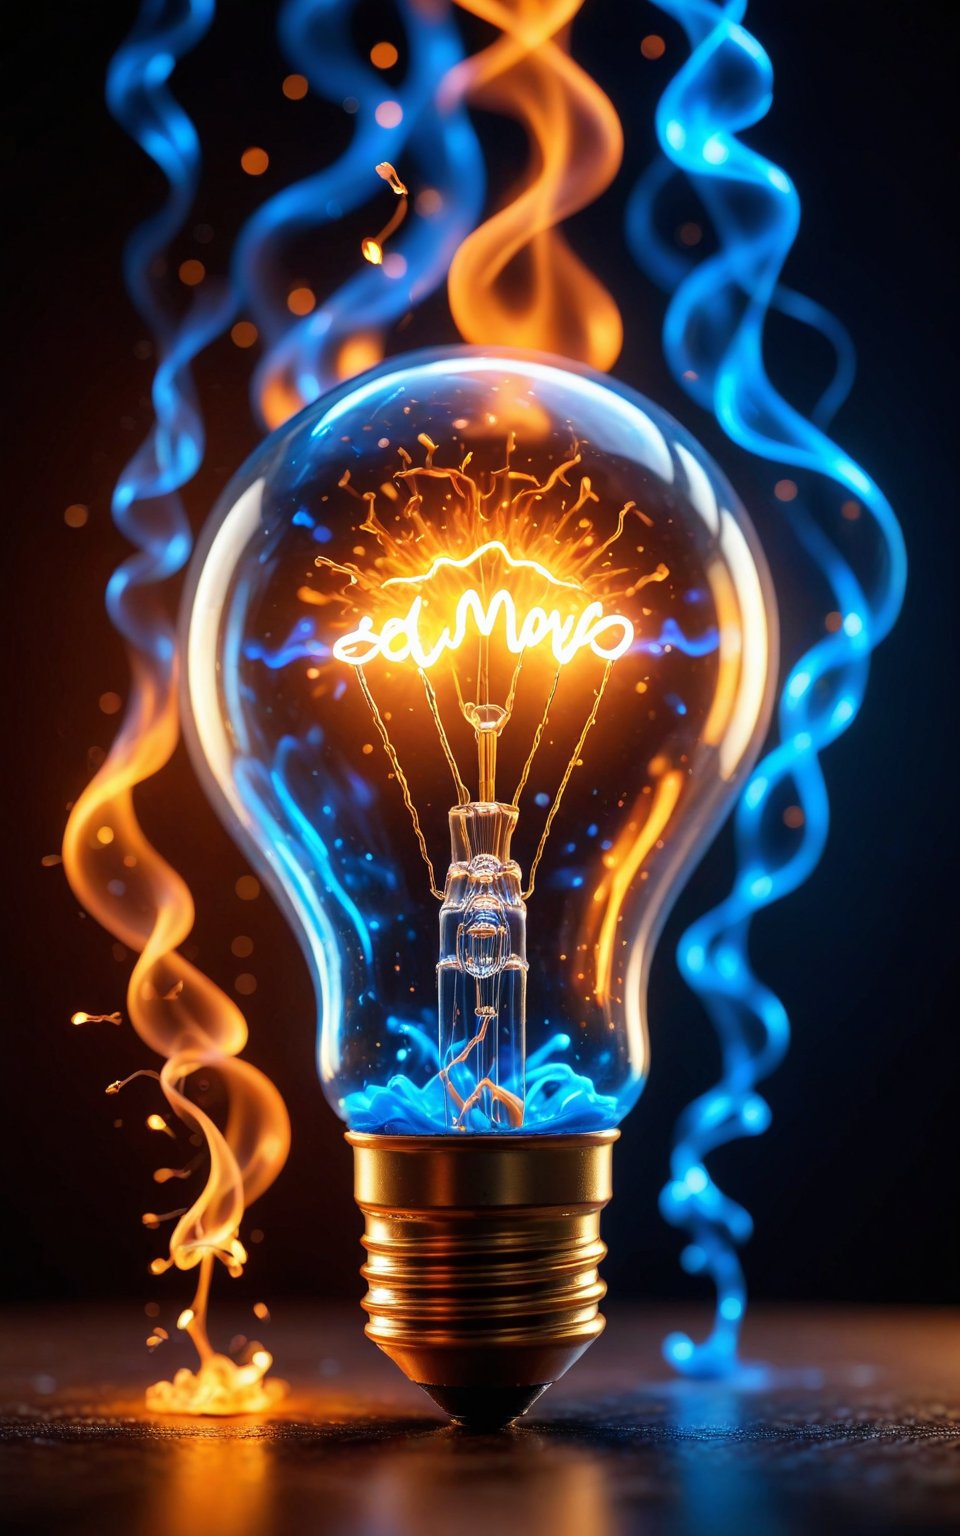 (best quality, 4K, 8K, high-resolution, masterpiece), ultra-detailed, realistic, photorealistic, glowing light bulb, inside fire, abstract background, bokeh effect, orange and blue color scheme, magical atmosphere, dynamic lighting, high contrast, detailed glass texture, sparks and particles, ethereal ambiance, high detail, high resolution, glowing filament, burning inside, mesmerizing visuals, cinematic composition.